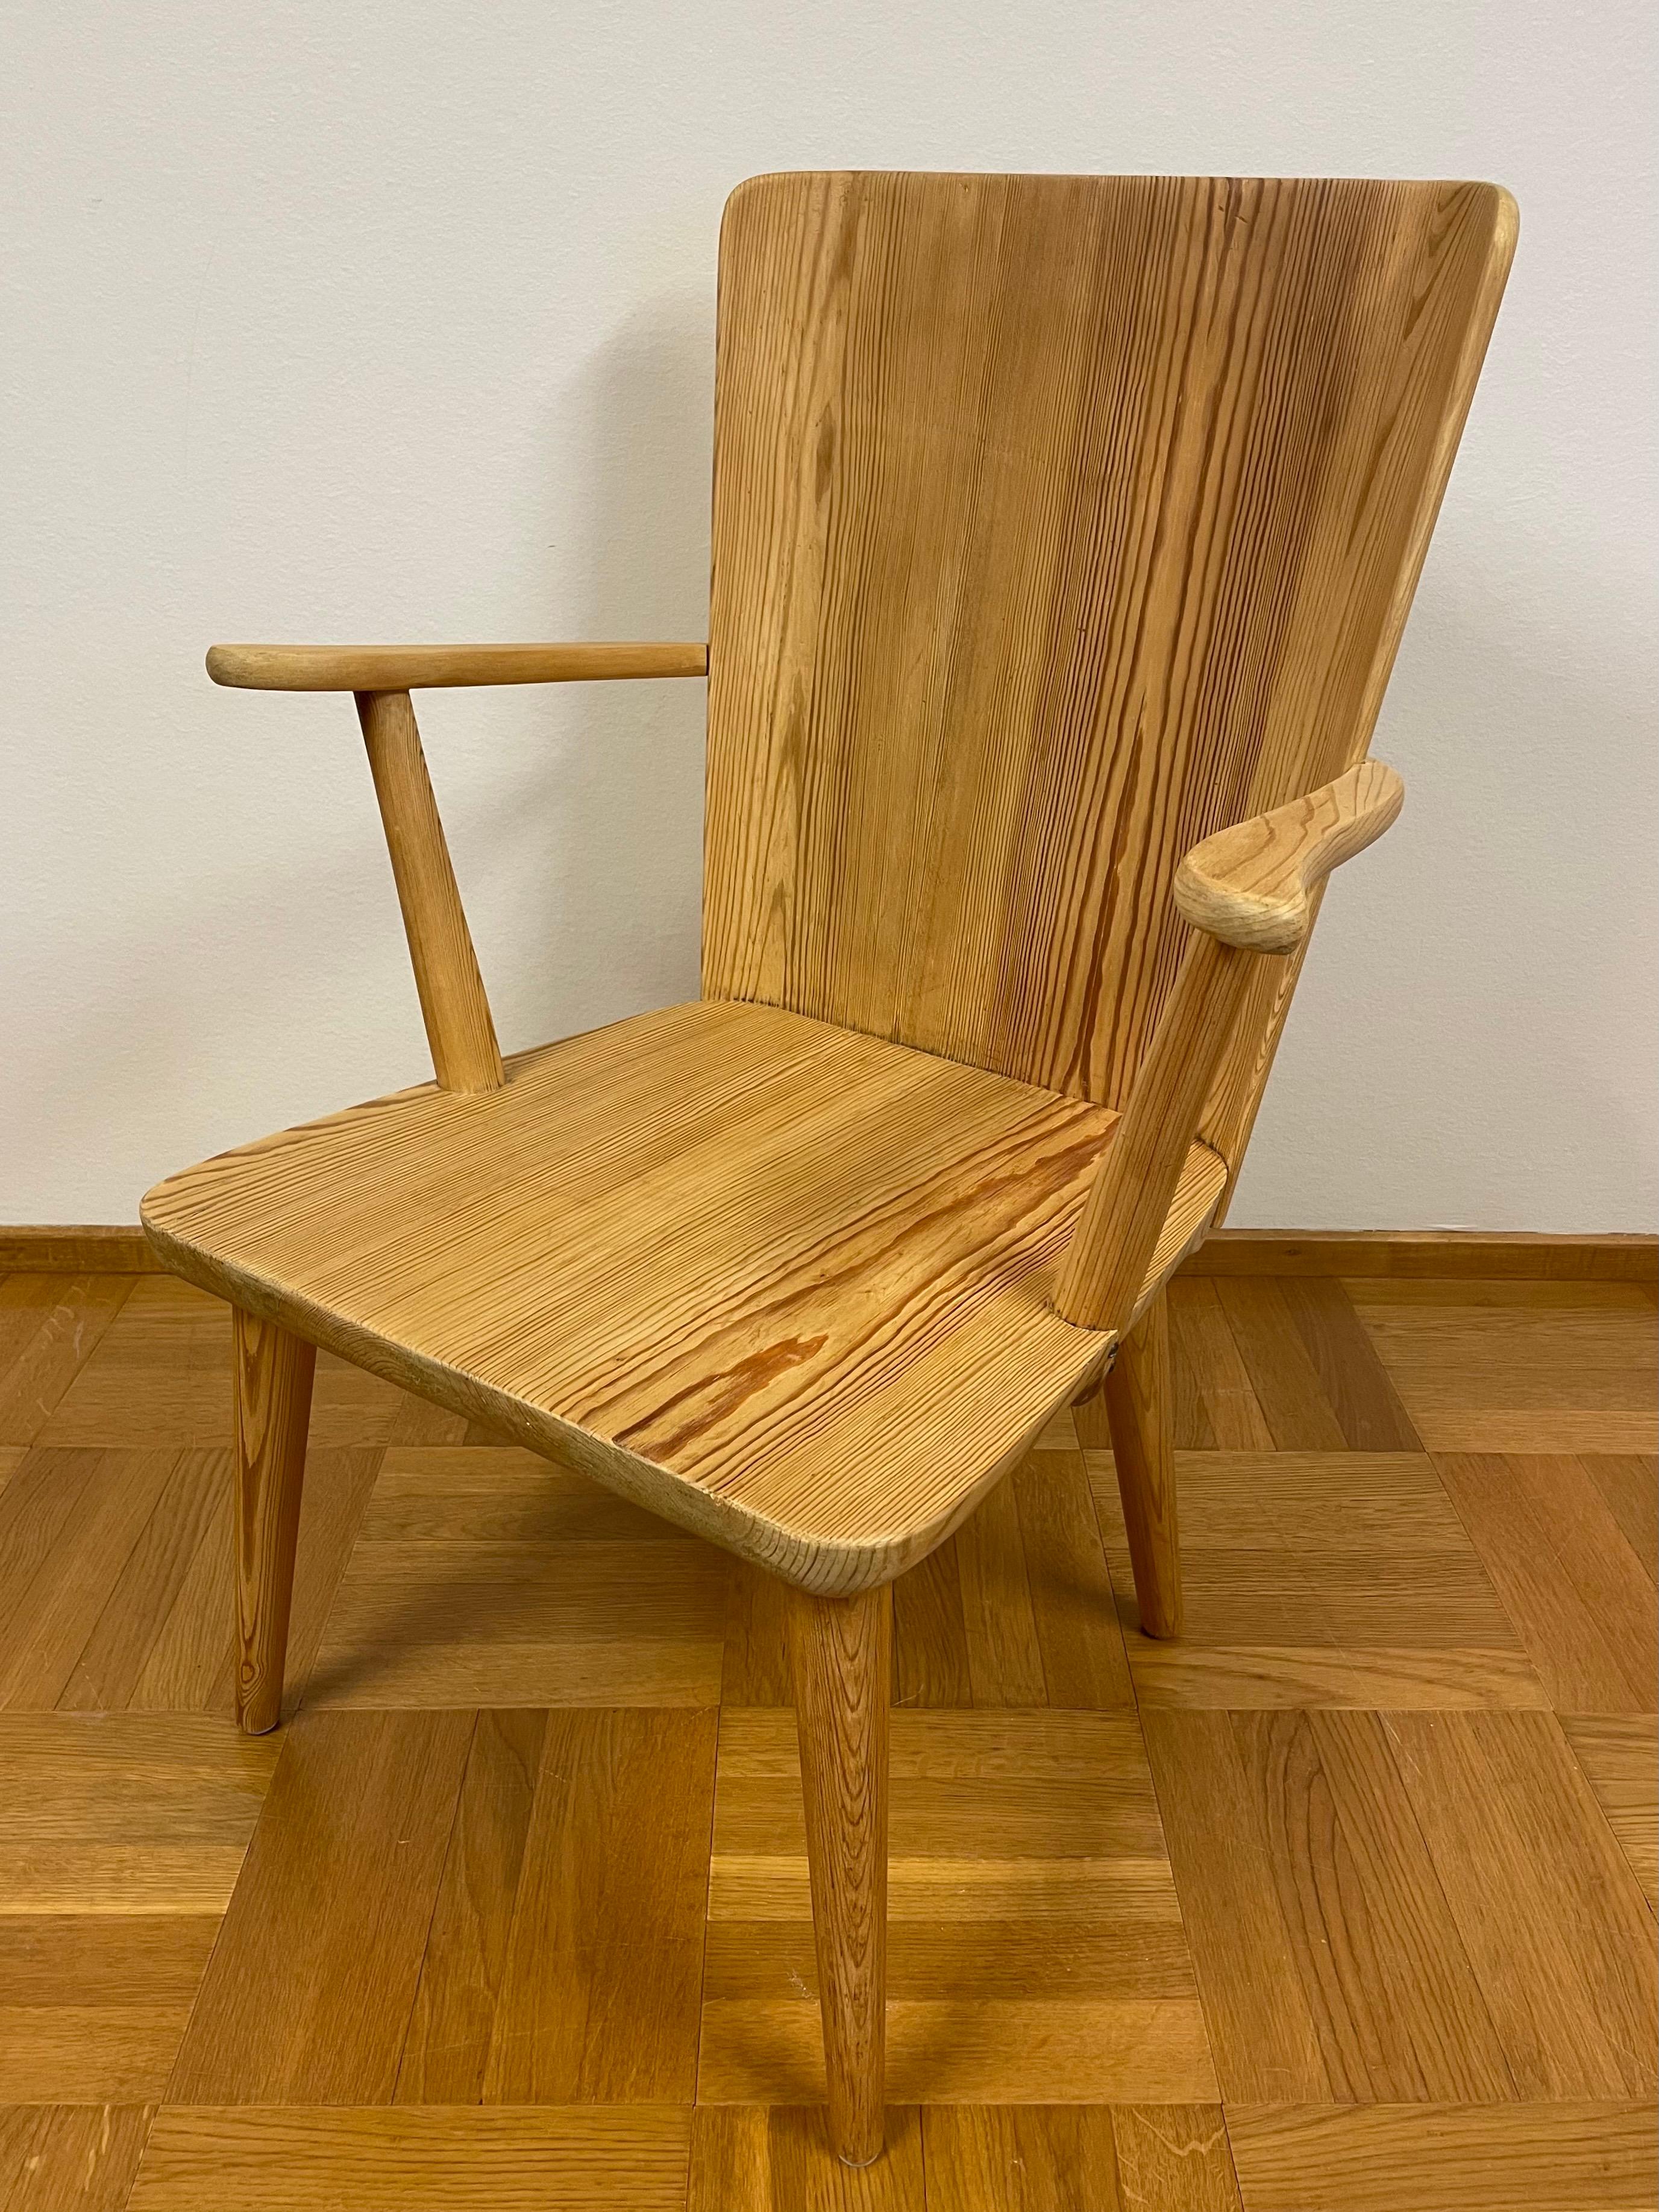 Hand-Crafted 1940s Swedish Pine Armchair by Göran Malmvall for Karl Andersson & Söner  For Sale